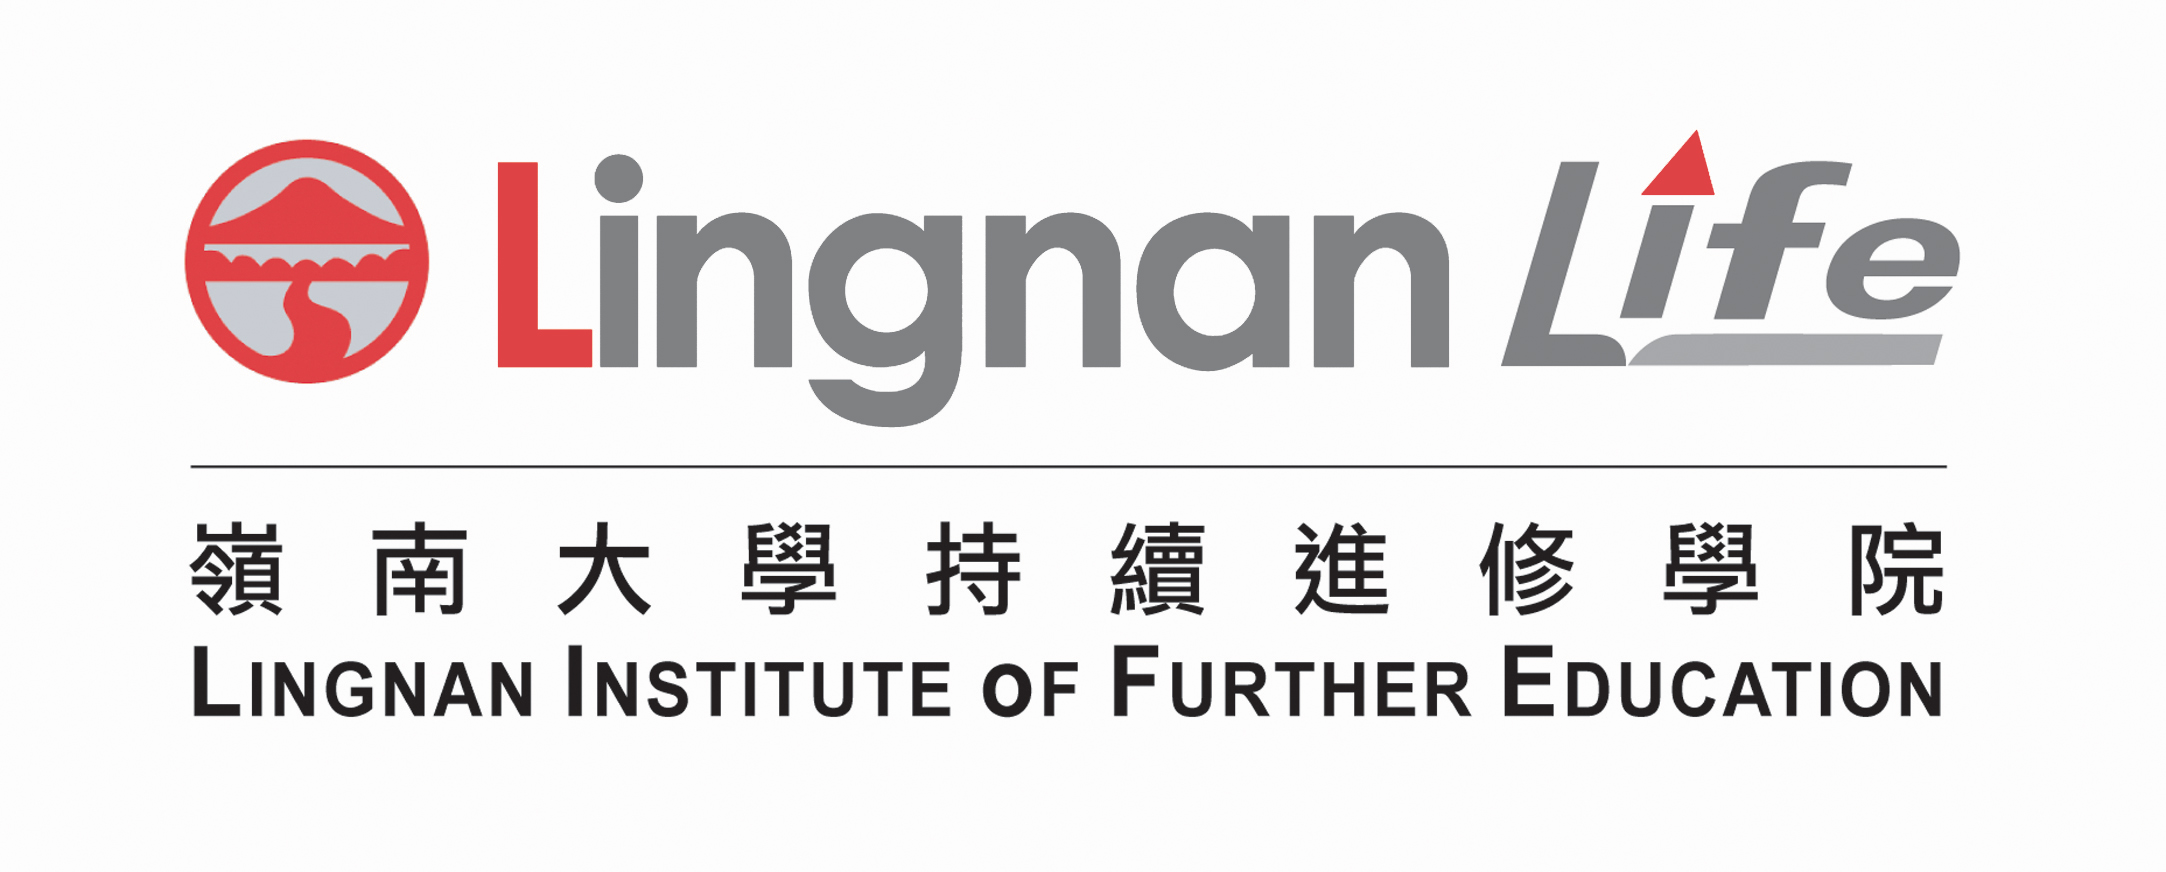 Lingnan Institute of Further Education (LIFE)